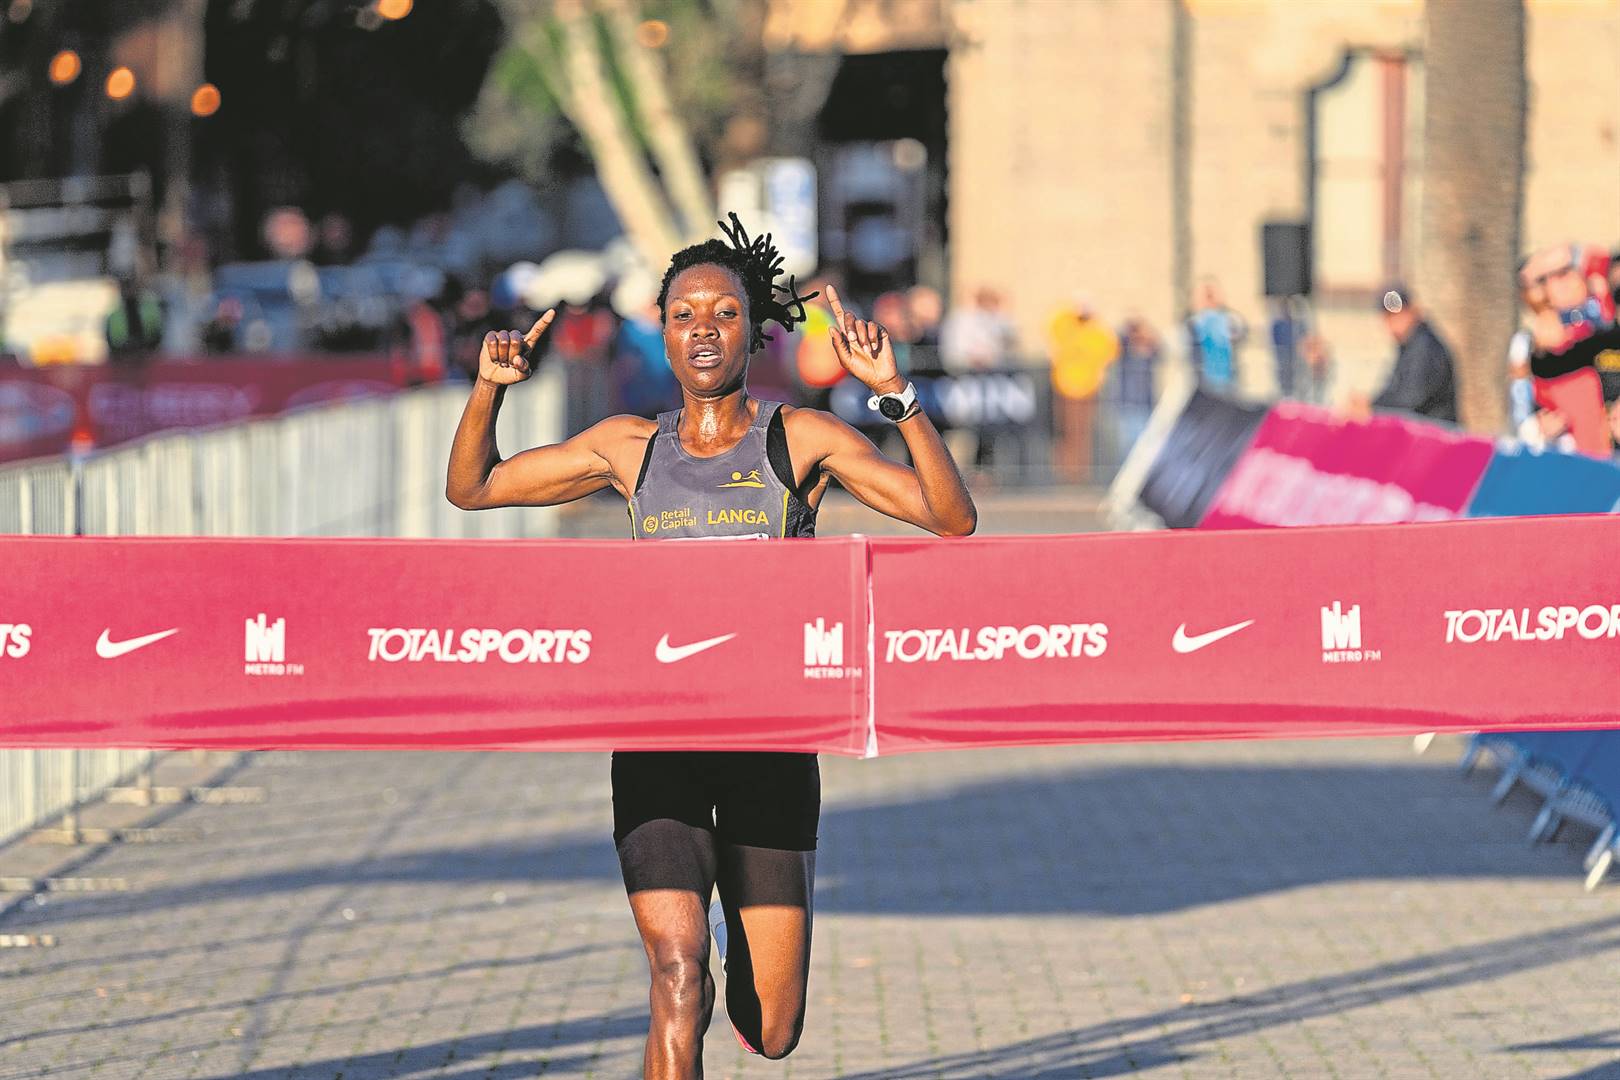 Fortunate Chidzivo celebrated Women’s Day in style by claiming her first Totalsports Women’s Race 10 km victory when she crossed the finish line at Grand Parade, in the Cape Town CBD in a deserving time of 35 minutes 28 seconds. PHOTOS: MARK SAMPSON